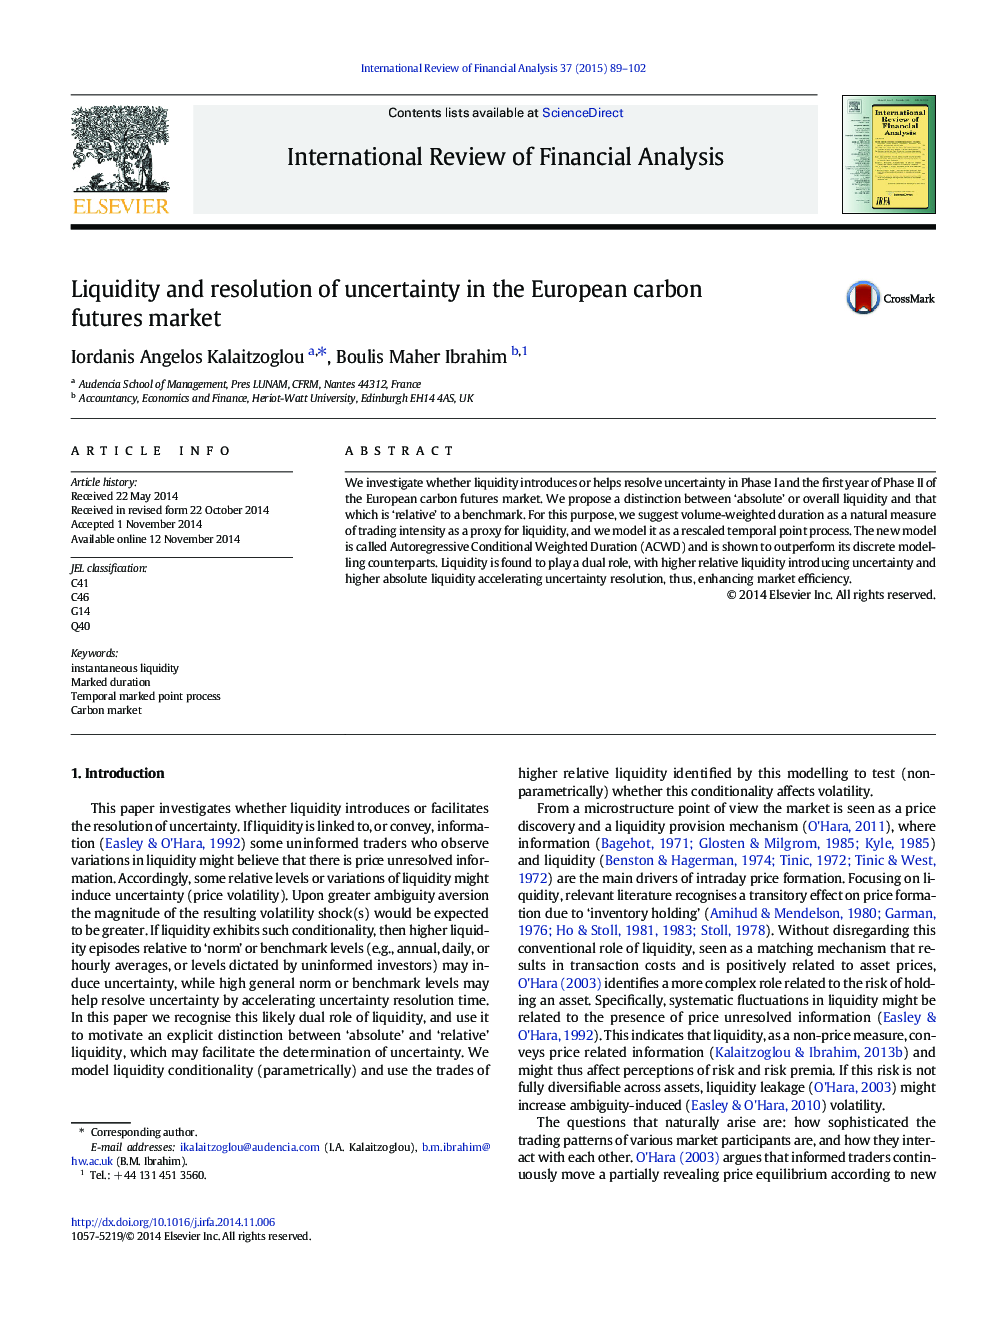 Liquidity and resolution of uncertainty in the European carbon futures market